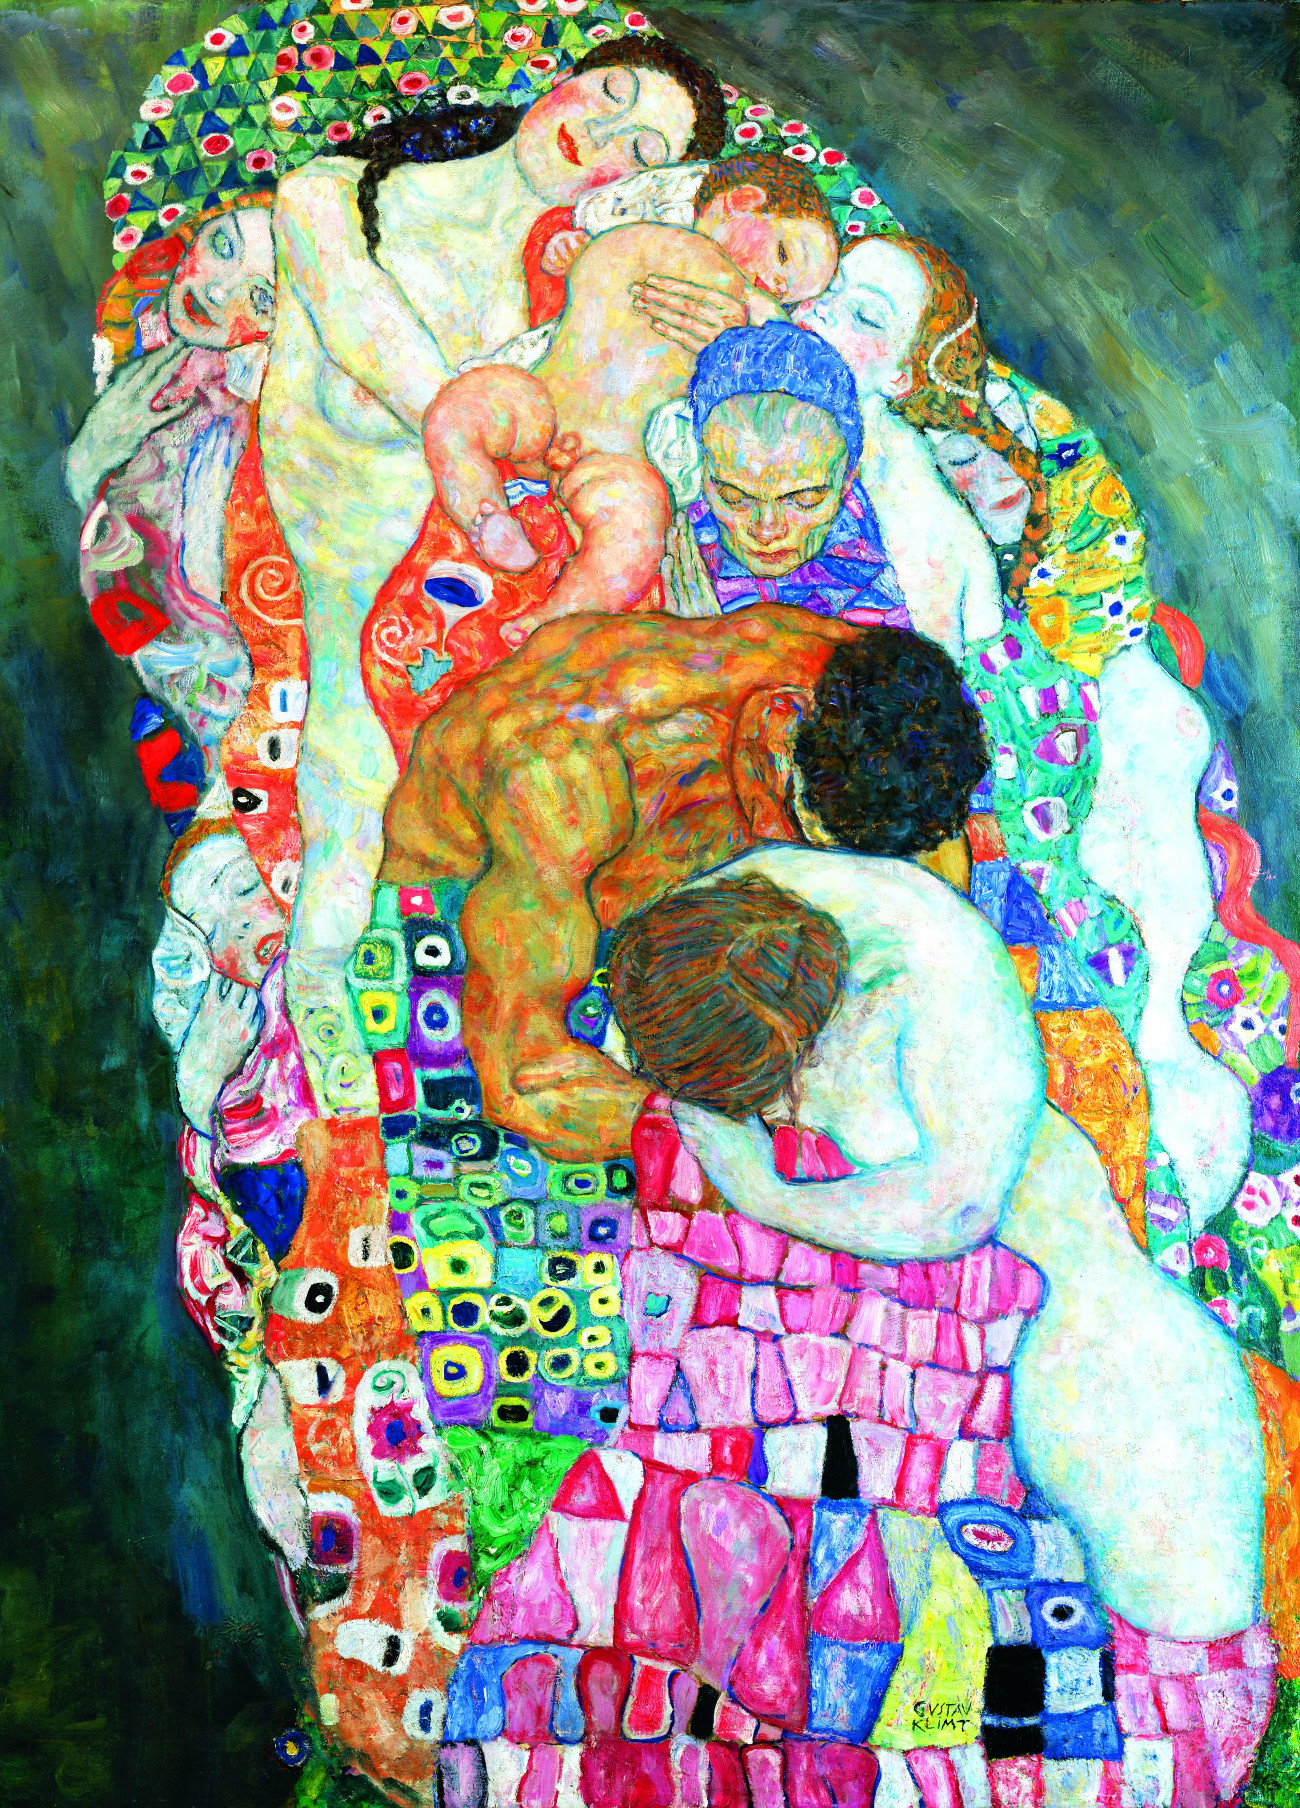 Gustav Klimt, Death and Life (1910-1911 and revised 1915-1916; oil on canvas, 180.5 x 200.5 cm; Vienna, Leopold Museum)